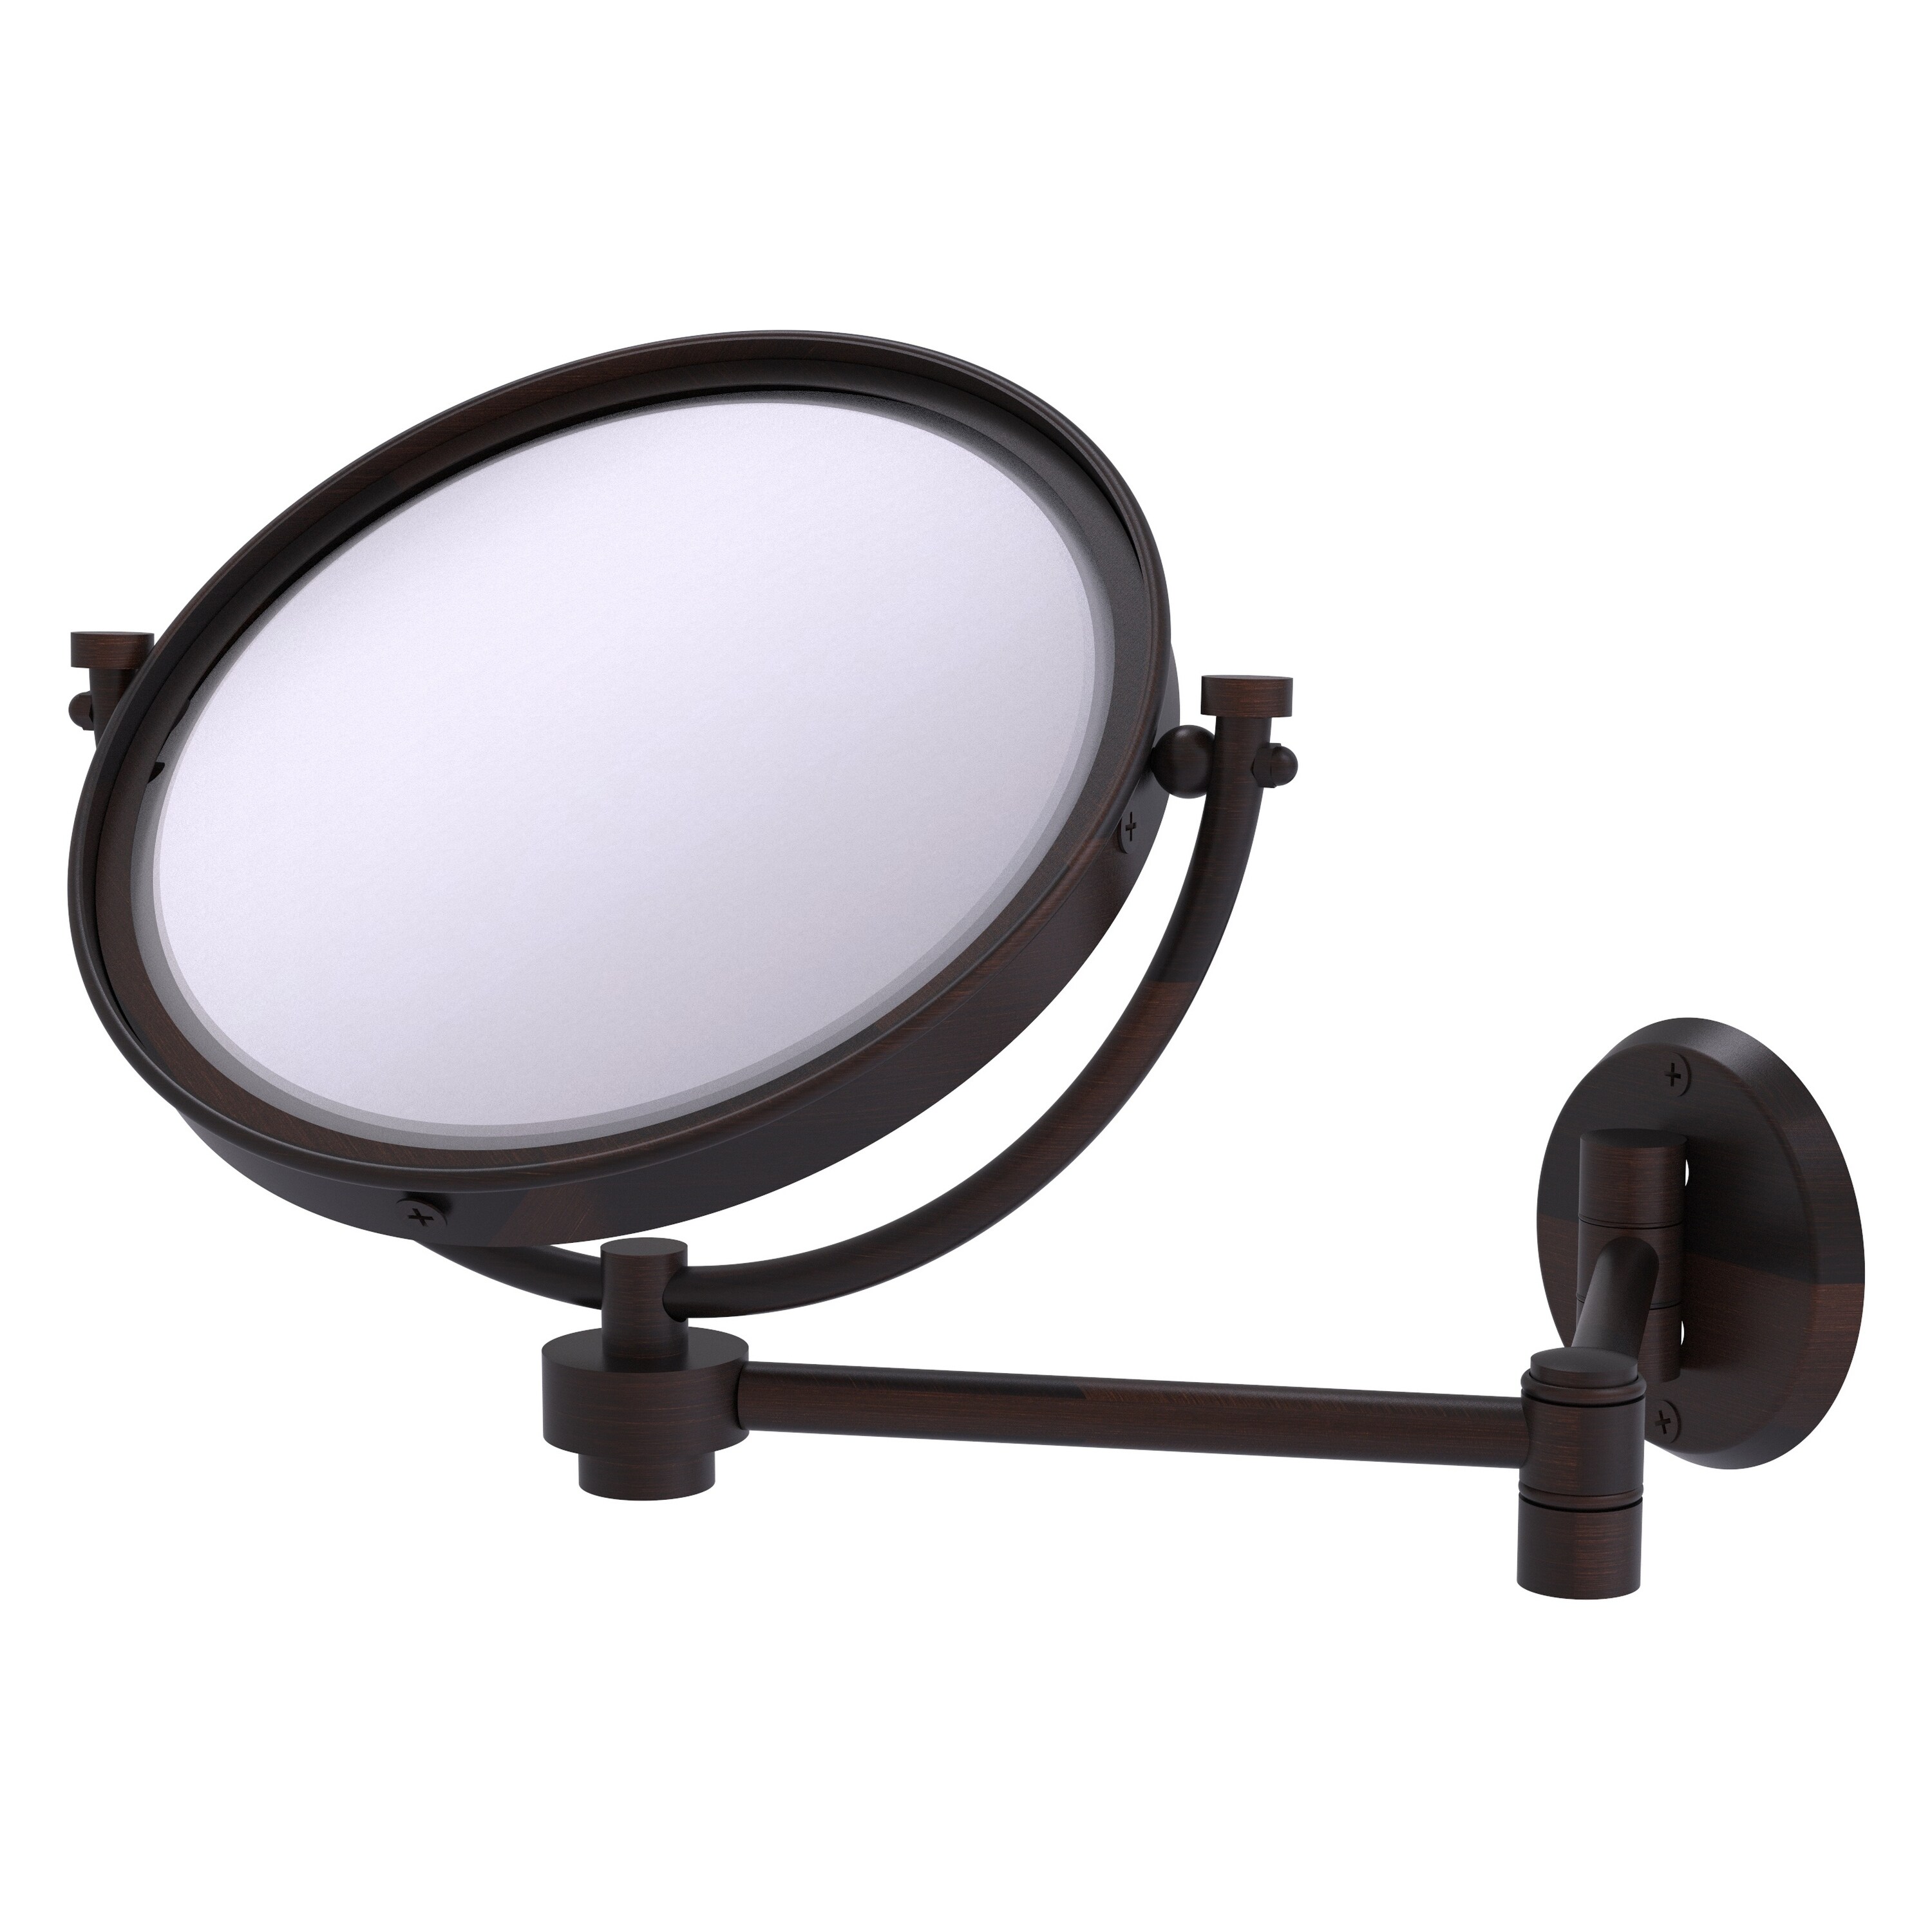 8-in x 10-in Distressed White Double-sided 3X Magnifying Wall-mounted Vanity Mirror | - Allied Brass WM-6/3X-VB